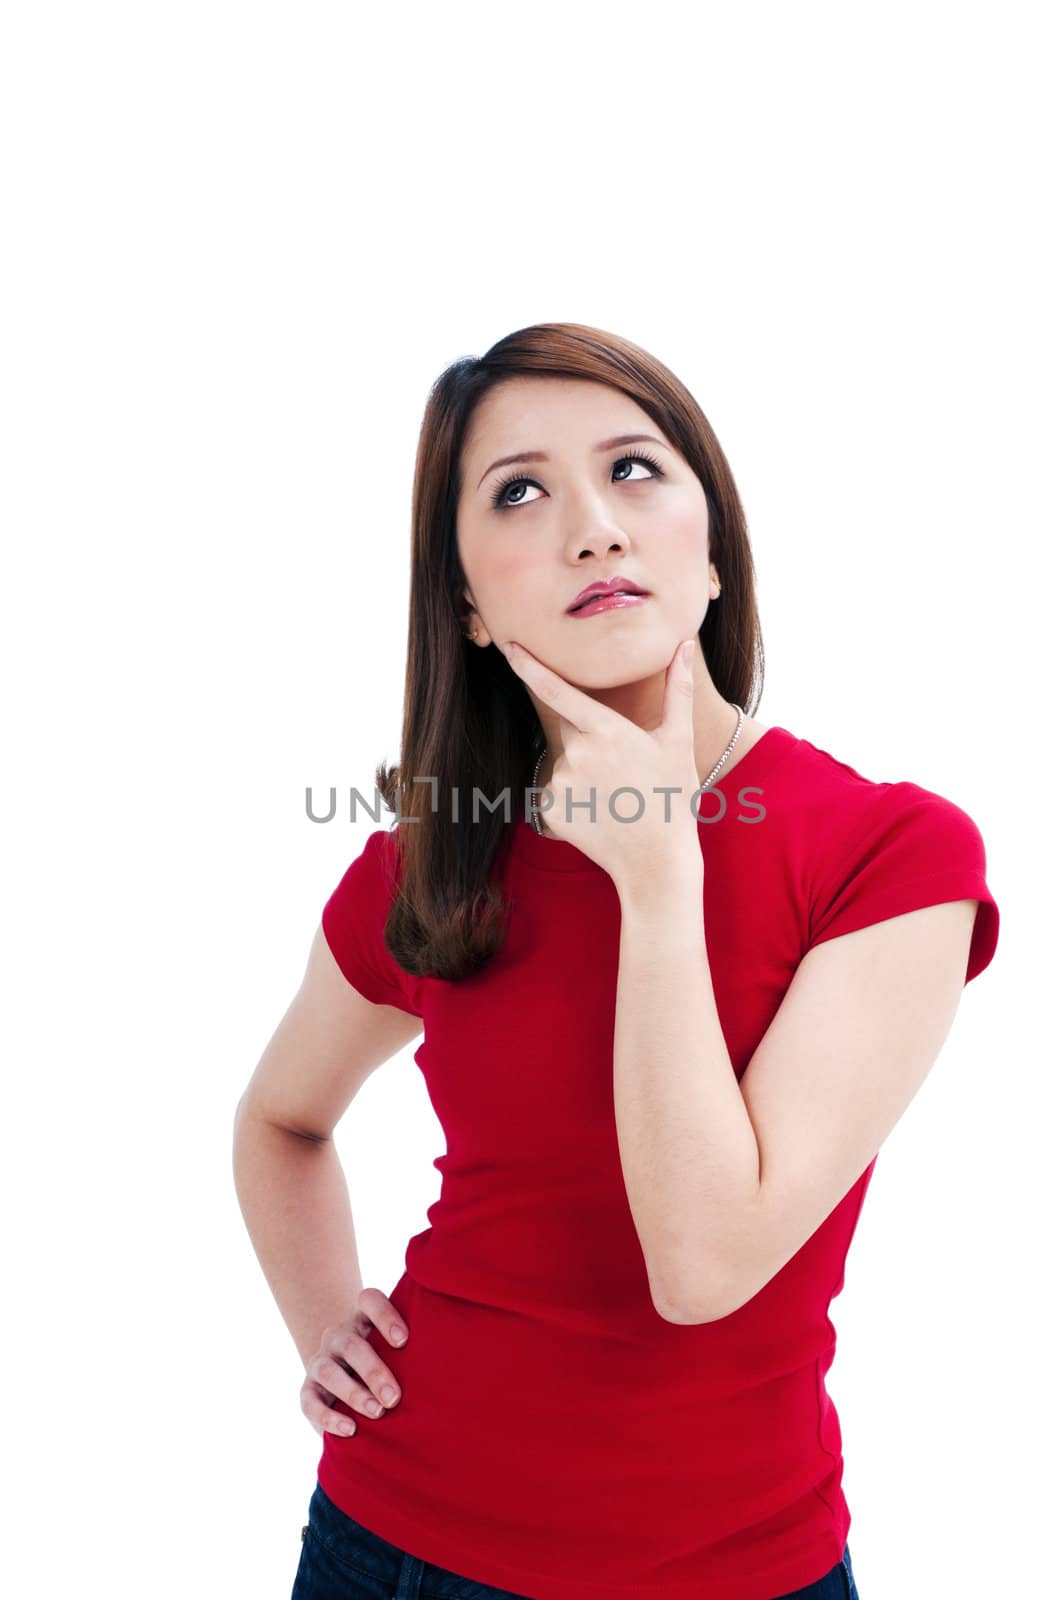 Portrait of an attractive young woman thinking, isolated on white background.